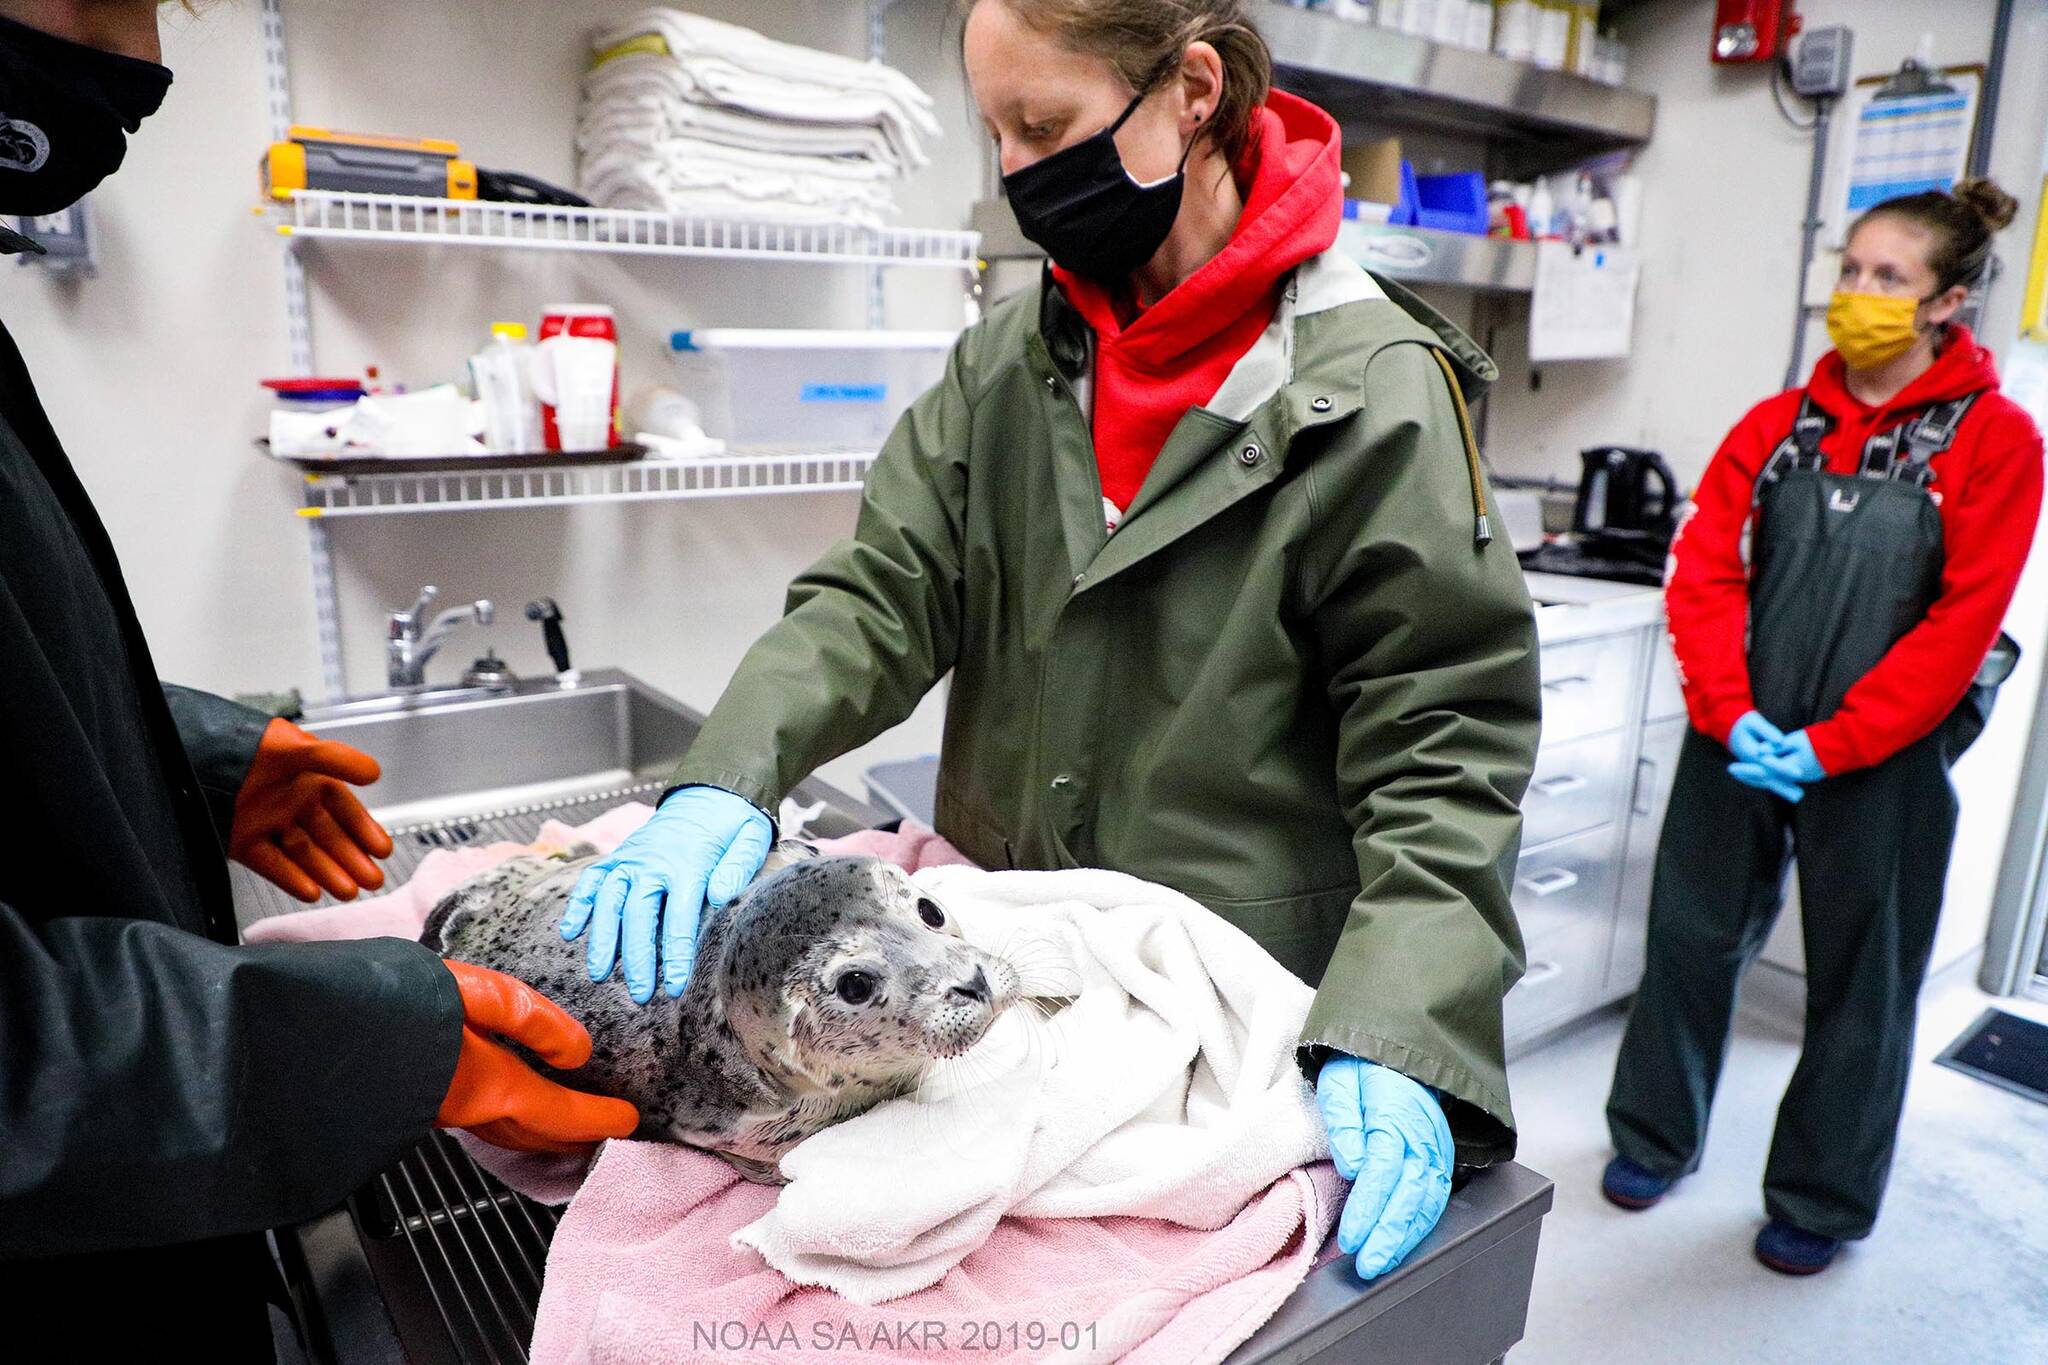 Staff members at the Alaska SeaLife Center near Seward attend to a harbor seal pup during the summer of 2021. This summer, one of the pups in the center’s care came from Juneau. The seal received treatment at the center and was released into the wild in September. (Courtesy photo/Alaska SeaLife Center/Kaiti Chritz)